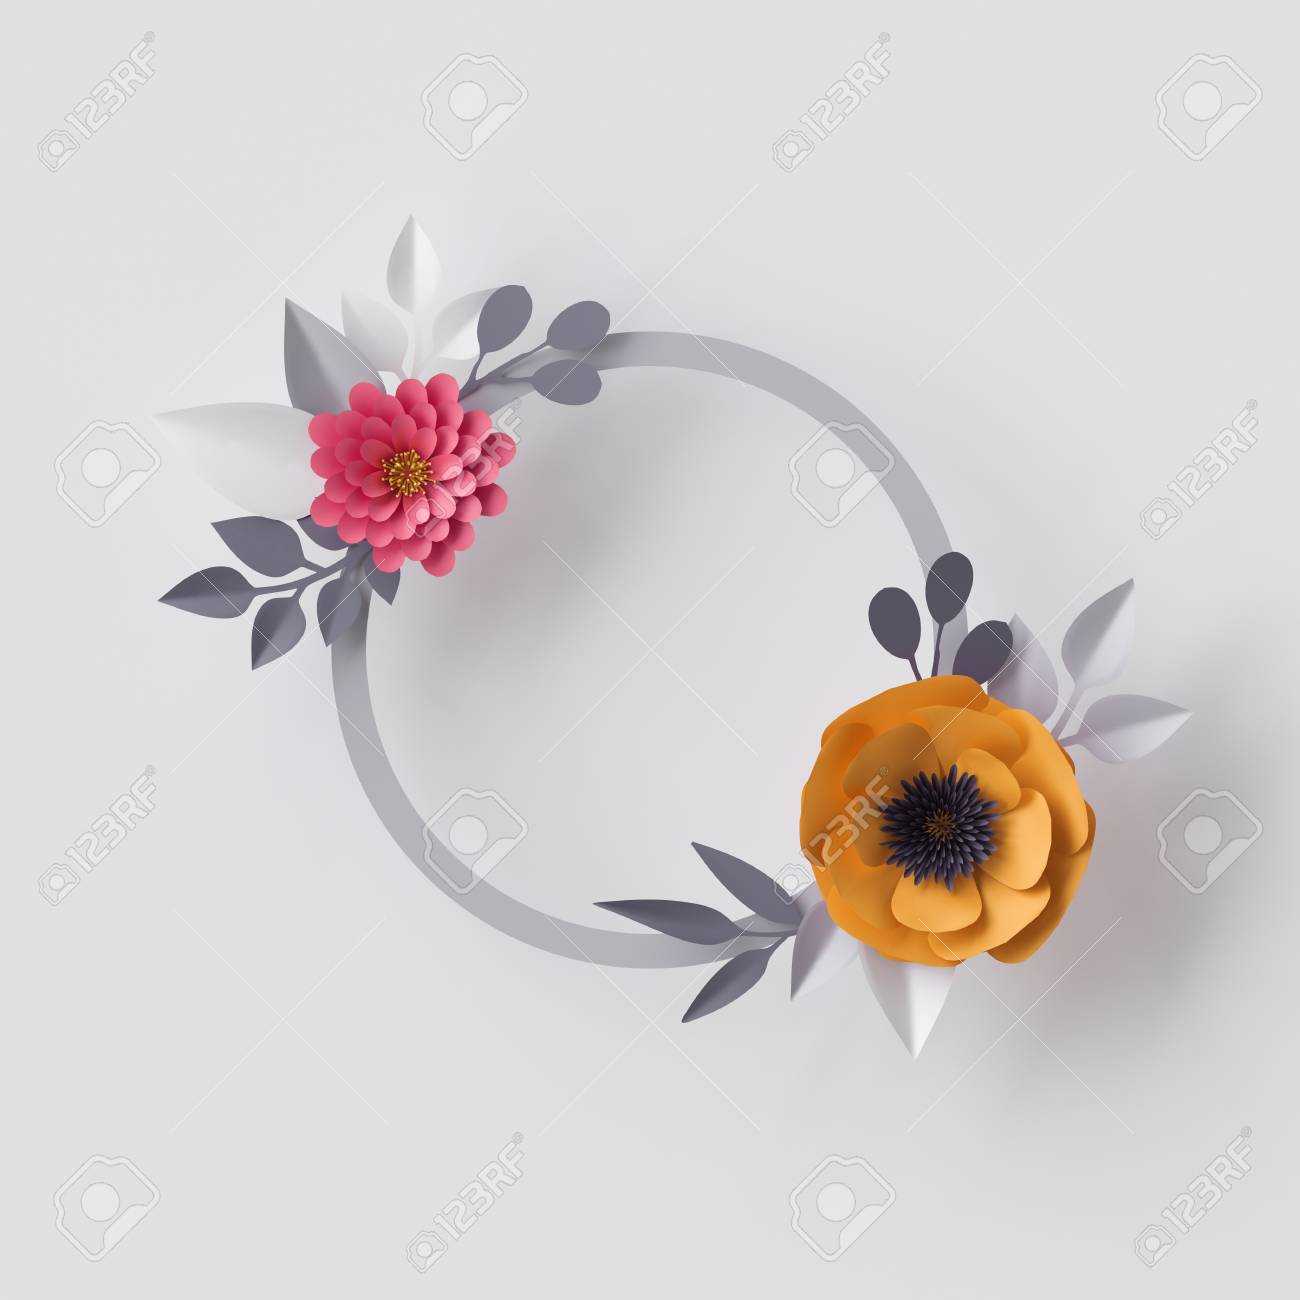 3D Render, Abstract Paper Flowers, Floral Background, Blank Round Frame,  Greeting Card Template Regarding Headband Card Template